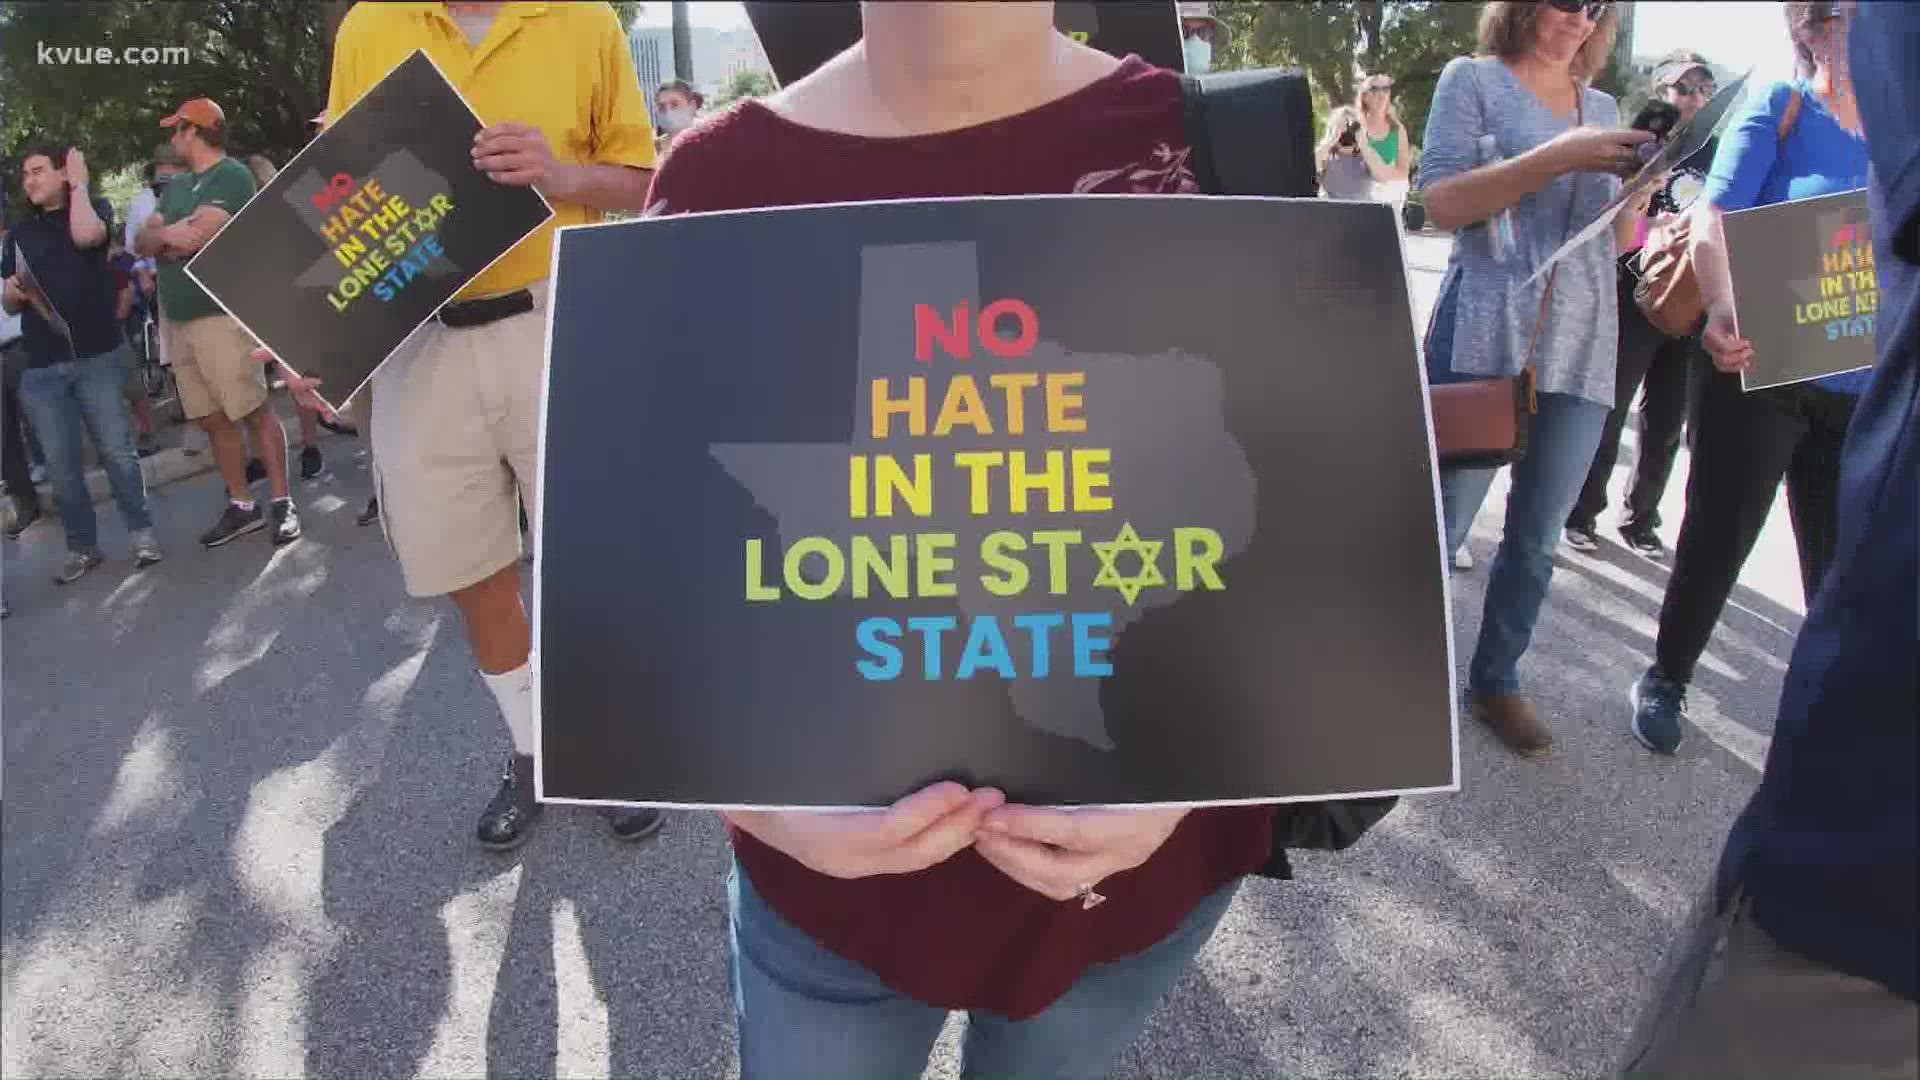 The event came after a string of recent incidents where anti-Semitism, racist and homophonic messaging has appeared in different locations around Austin.